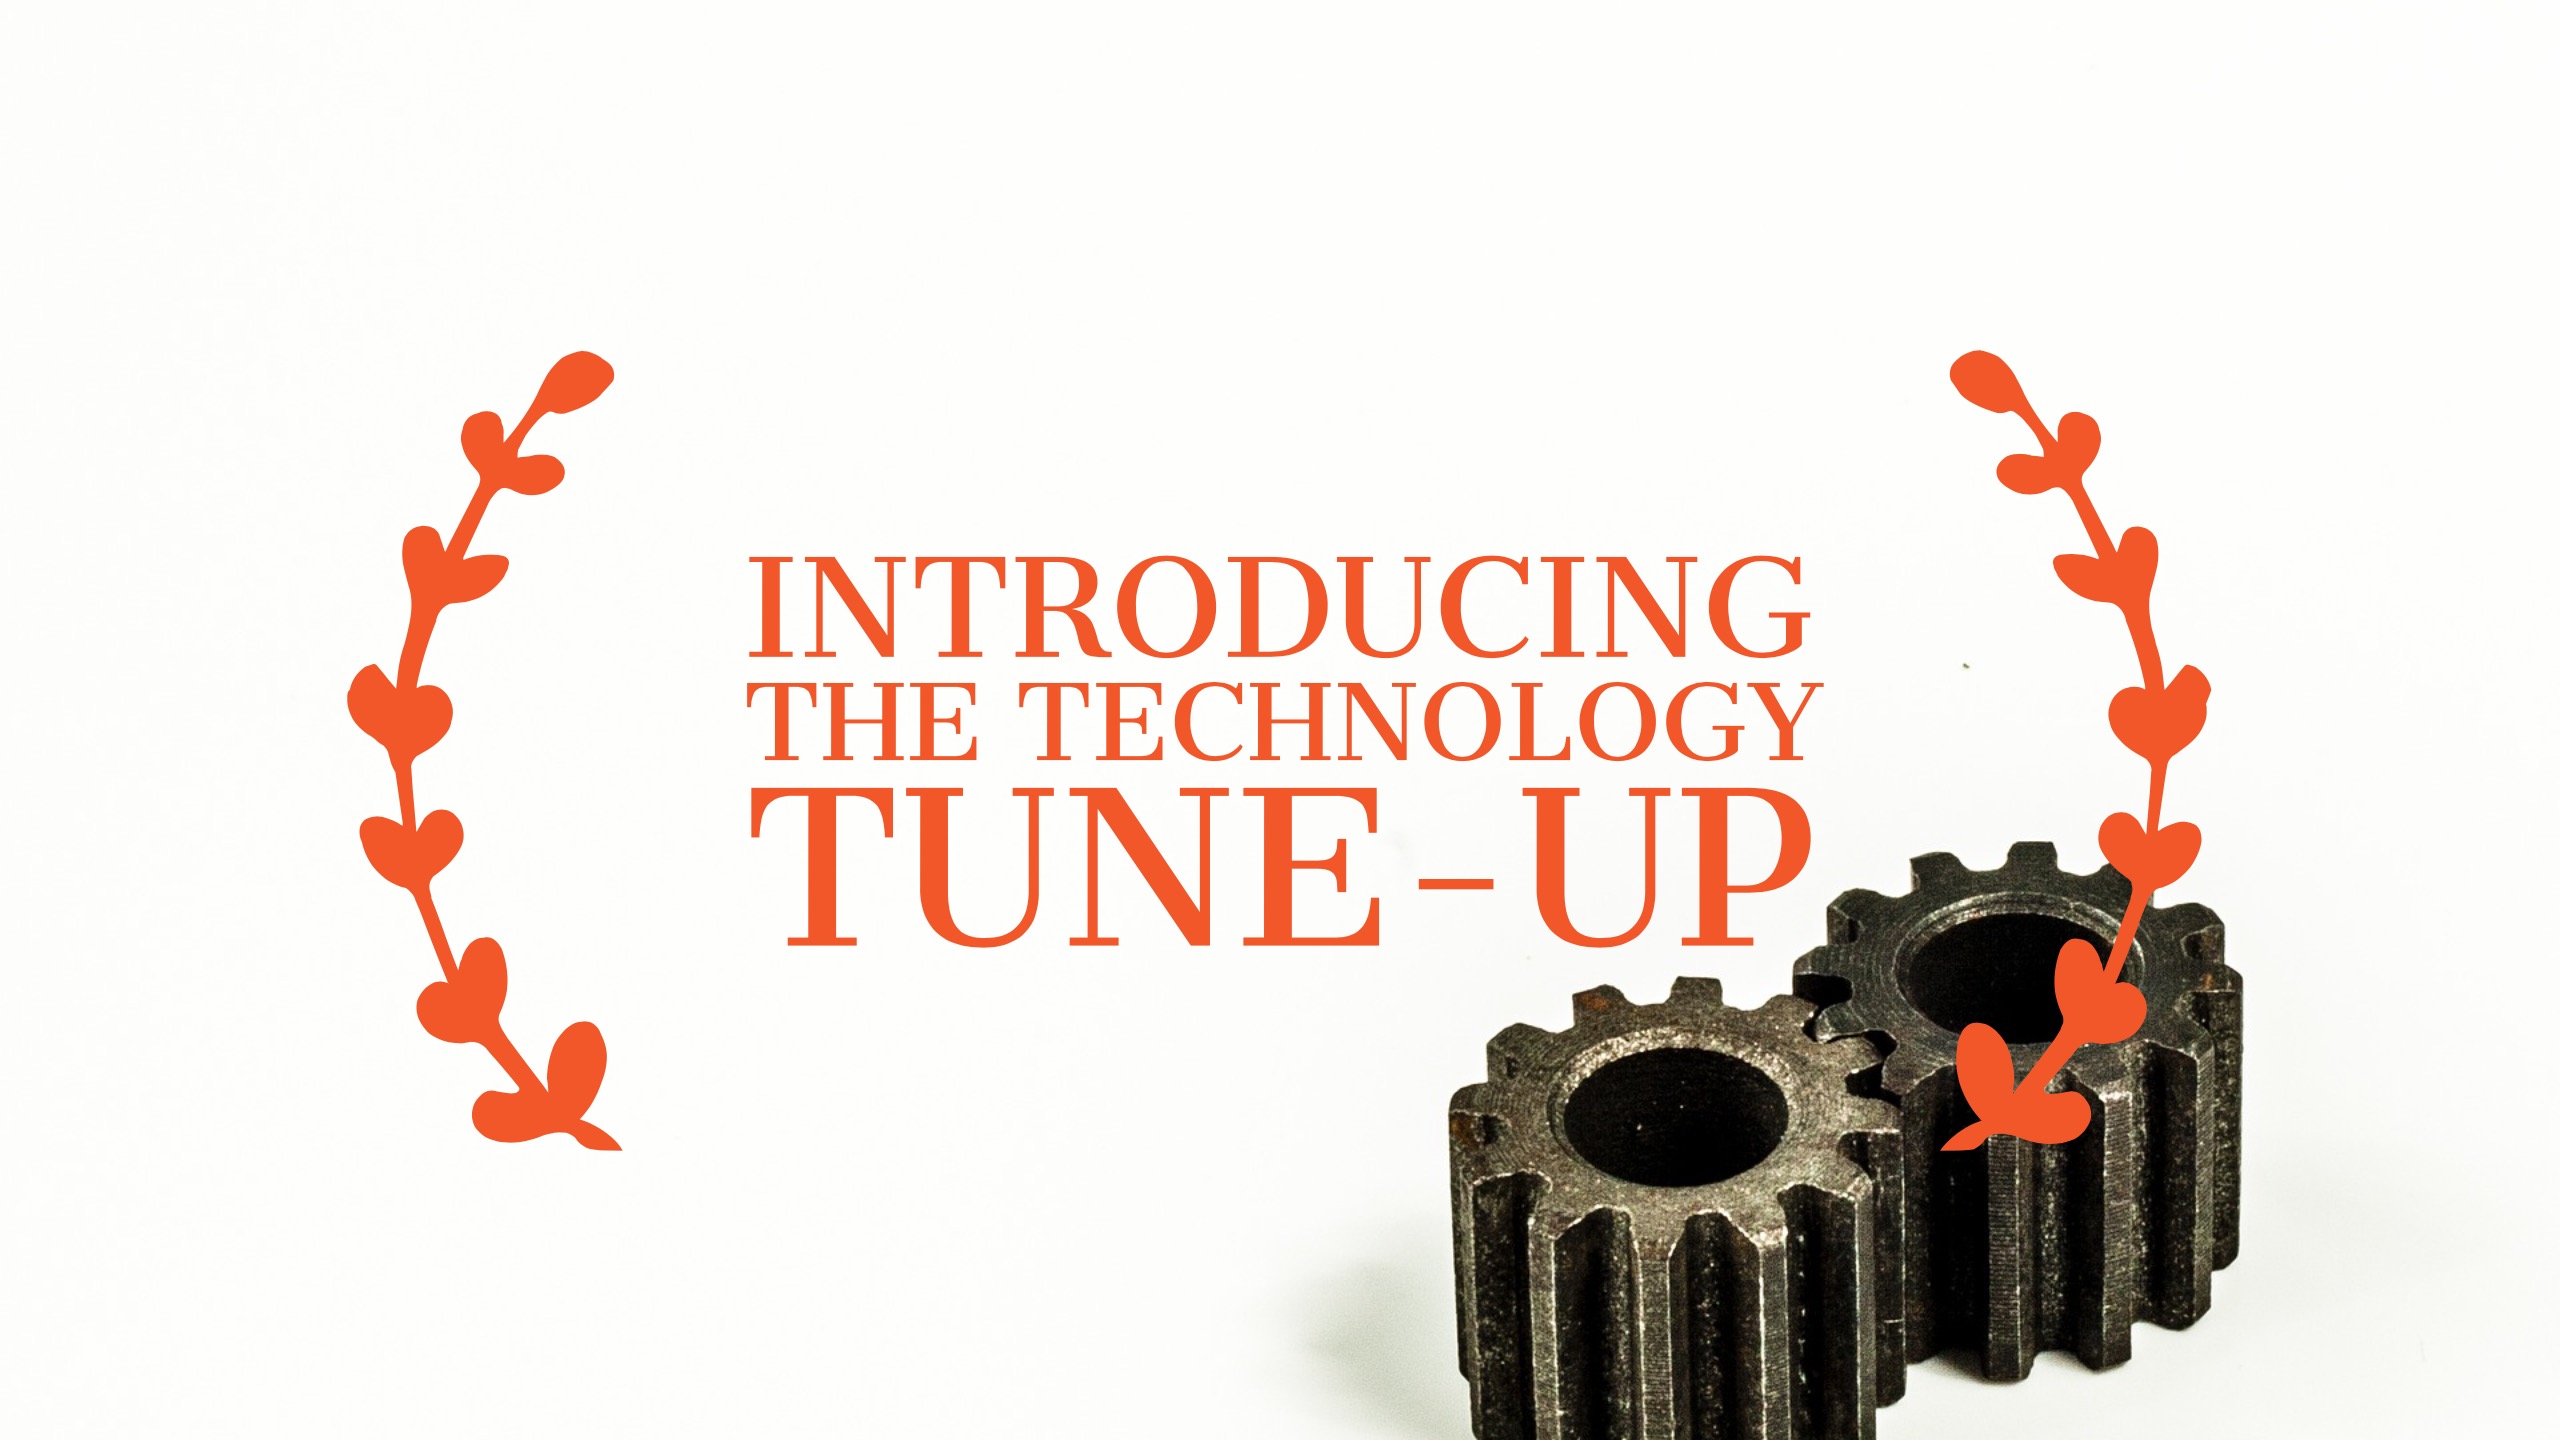 Are You Ready for a Technology Tune-Up?